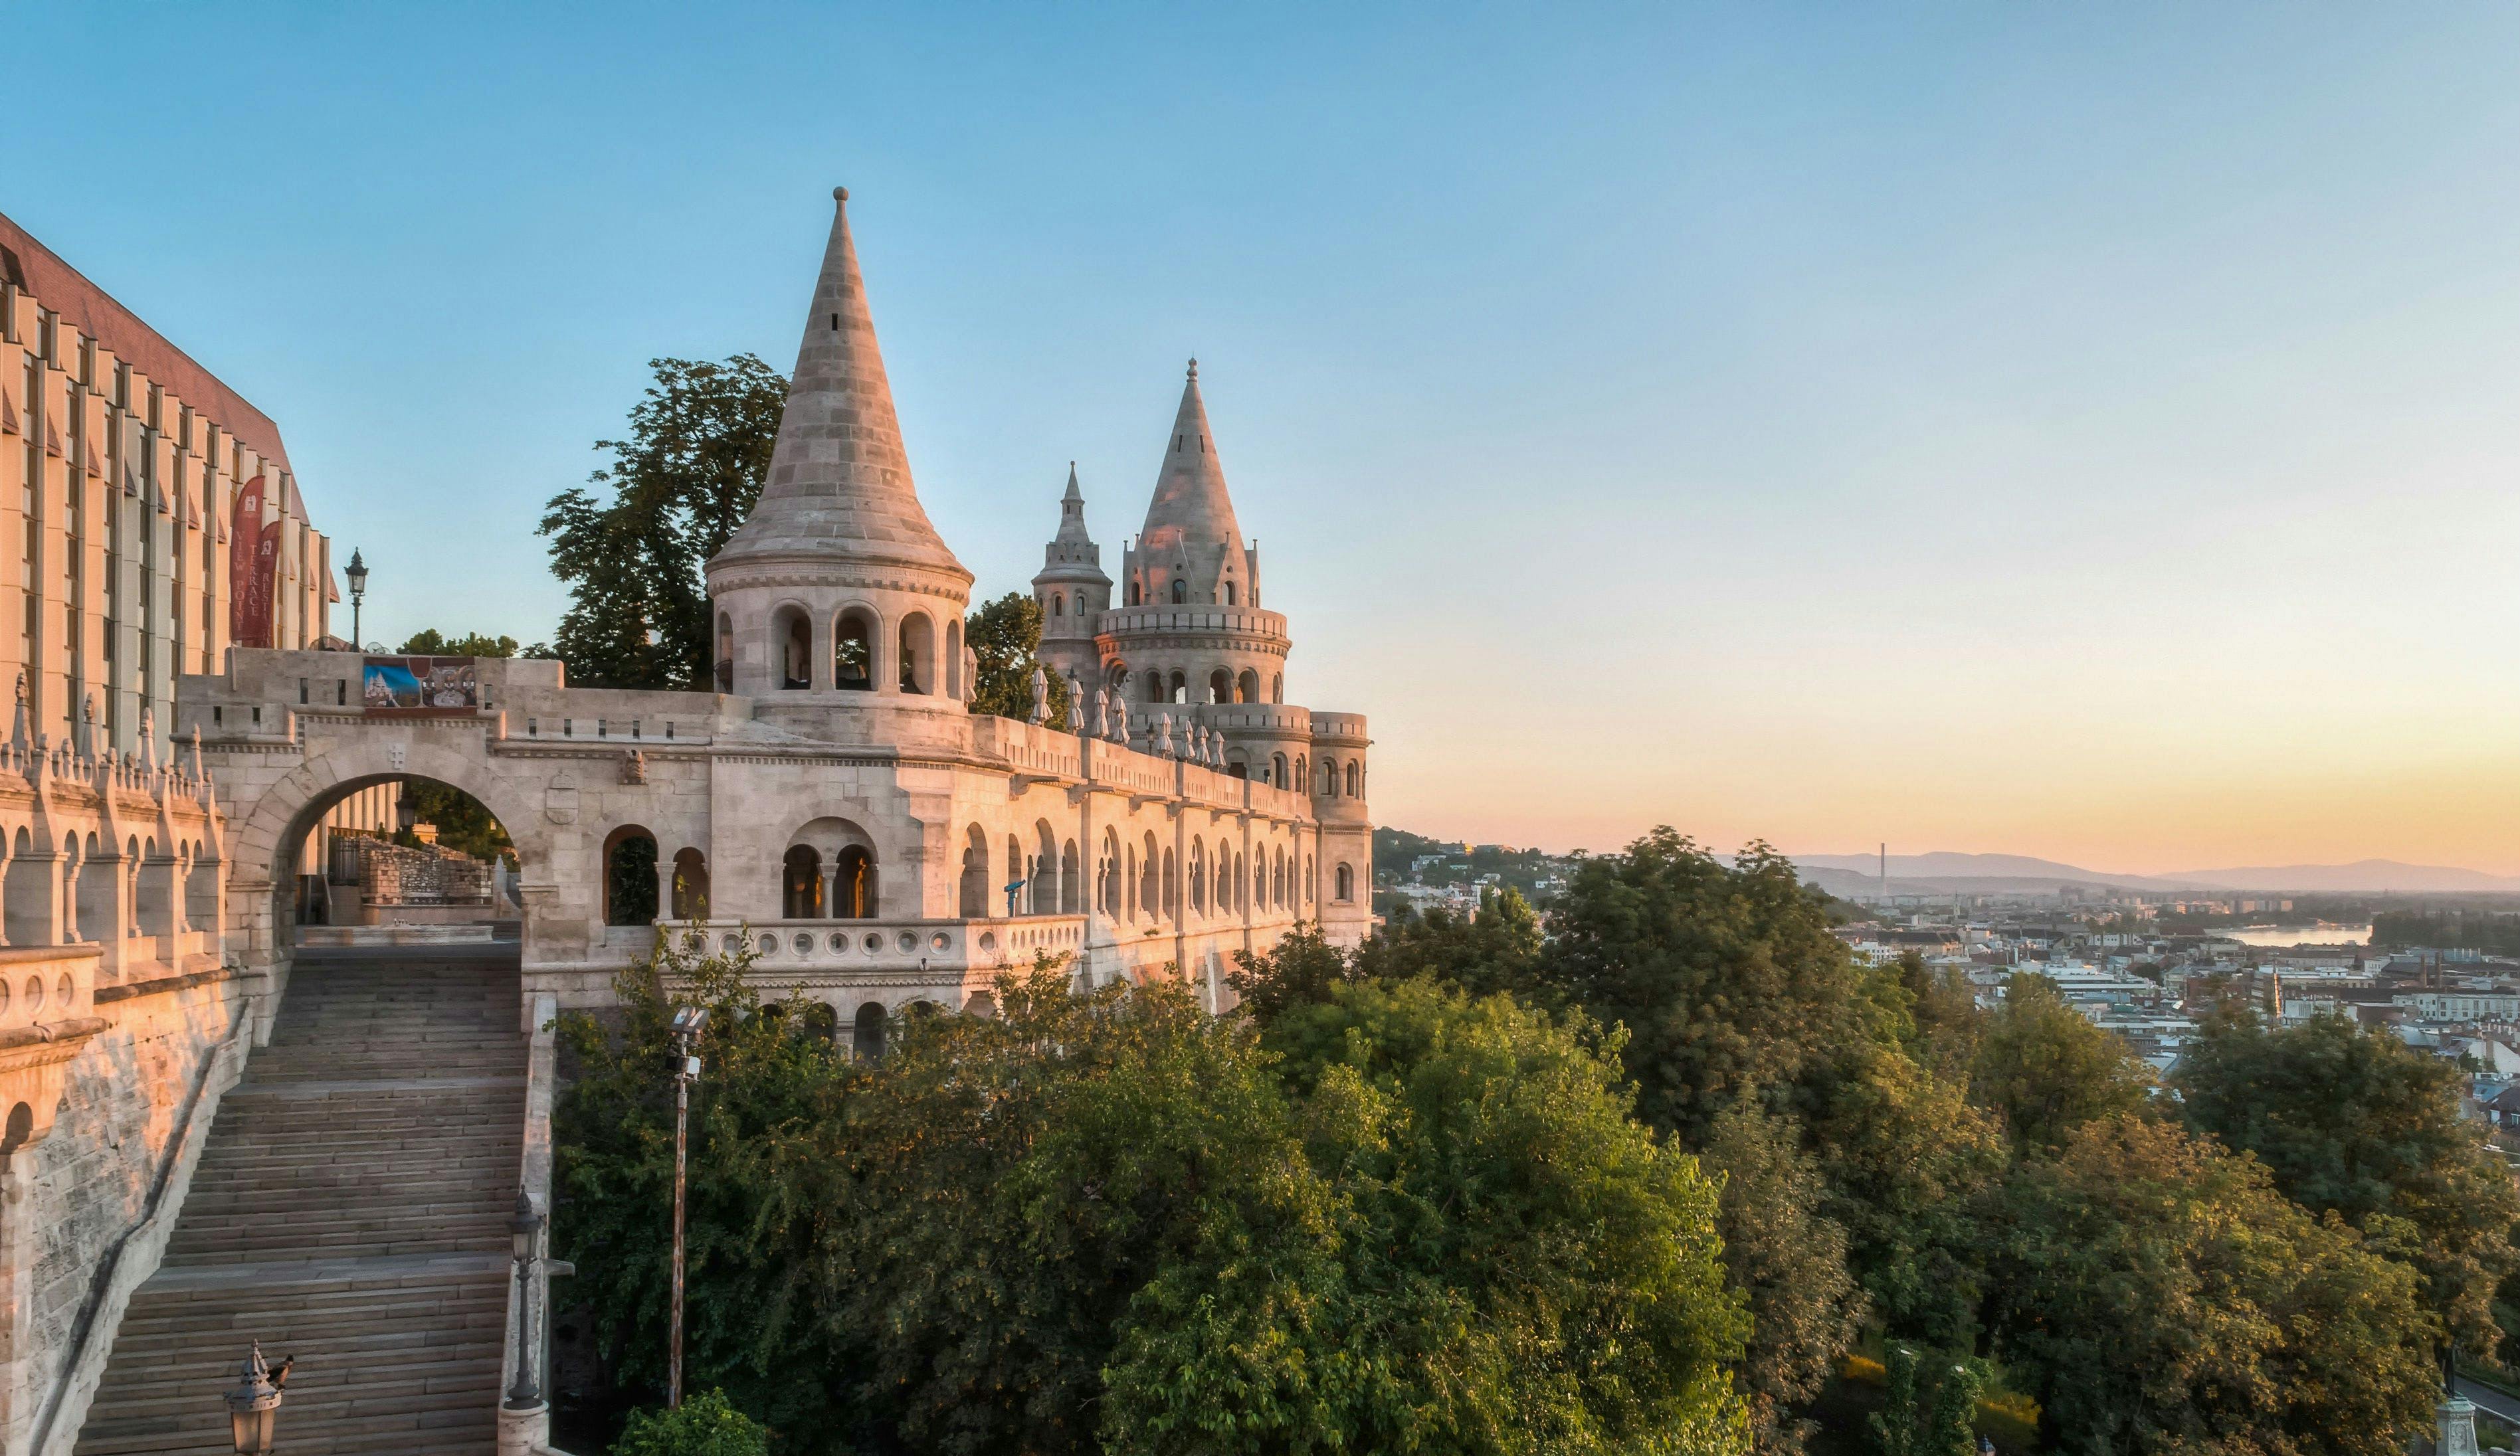 3-hour guided tour of Budapest